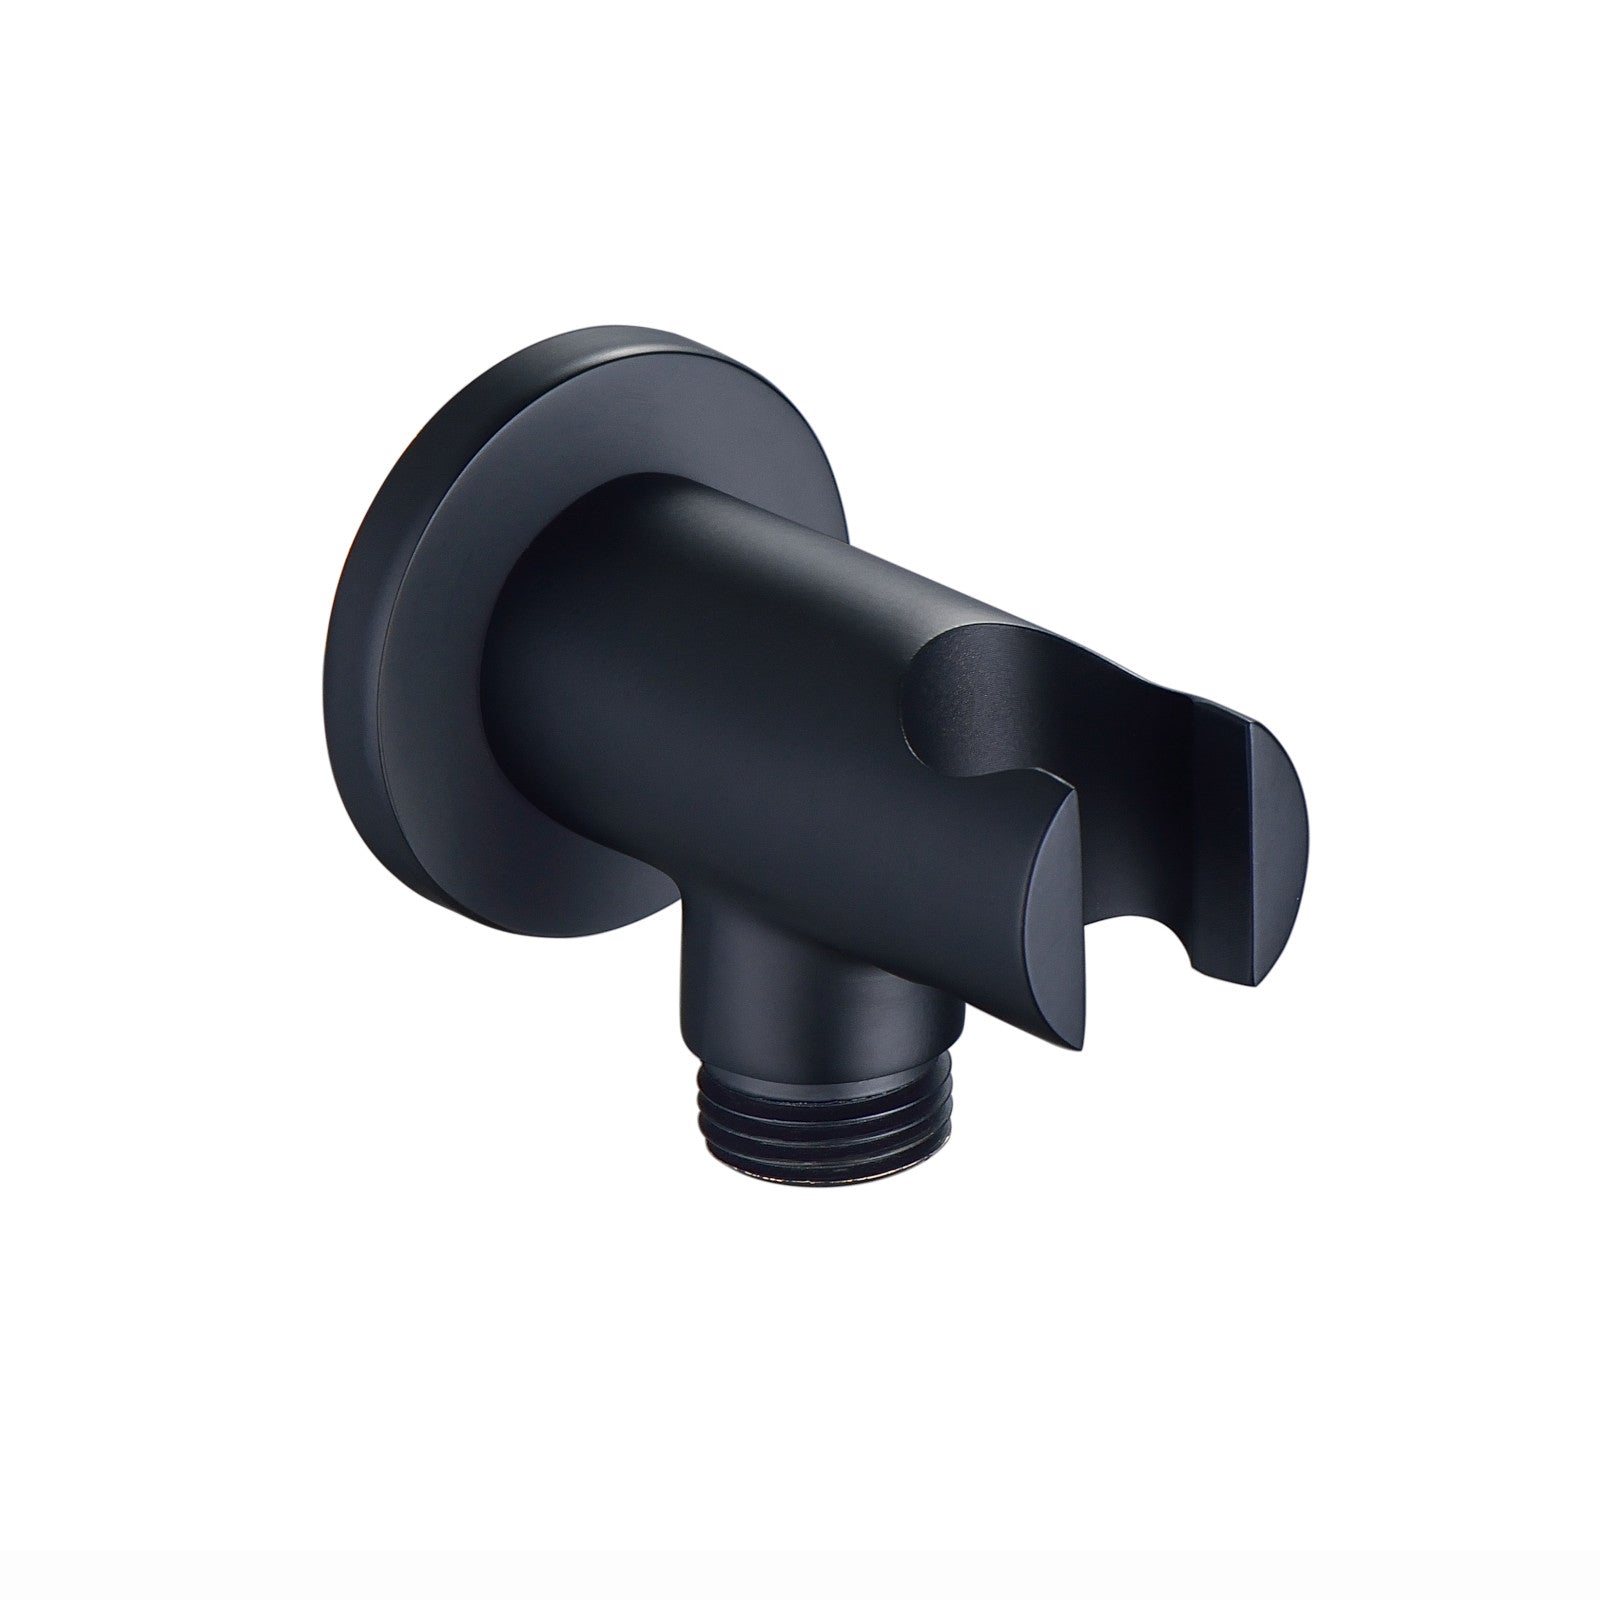 Round shower outlet elbow with holder for handheld shower head - matte black - Showers